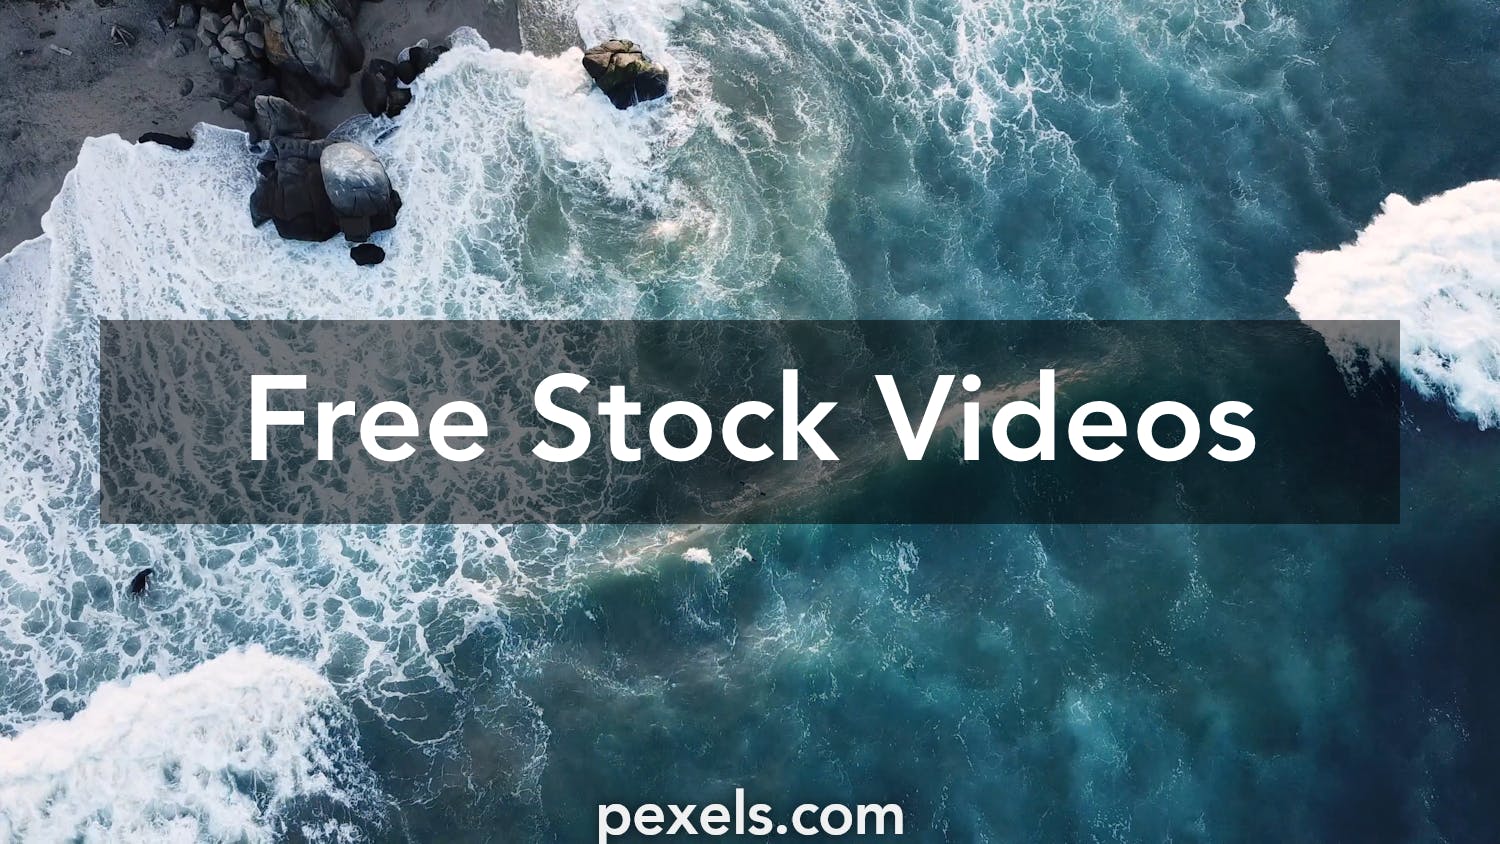 Free 4K Stock Videos & Full HD Video Clips to Download